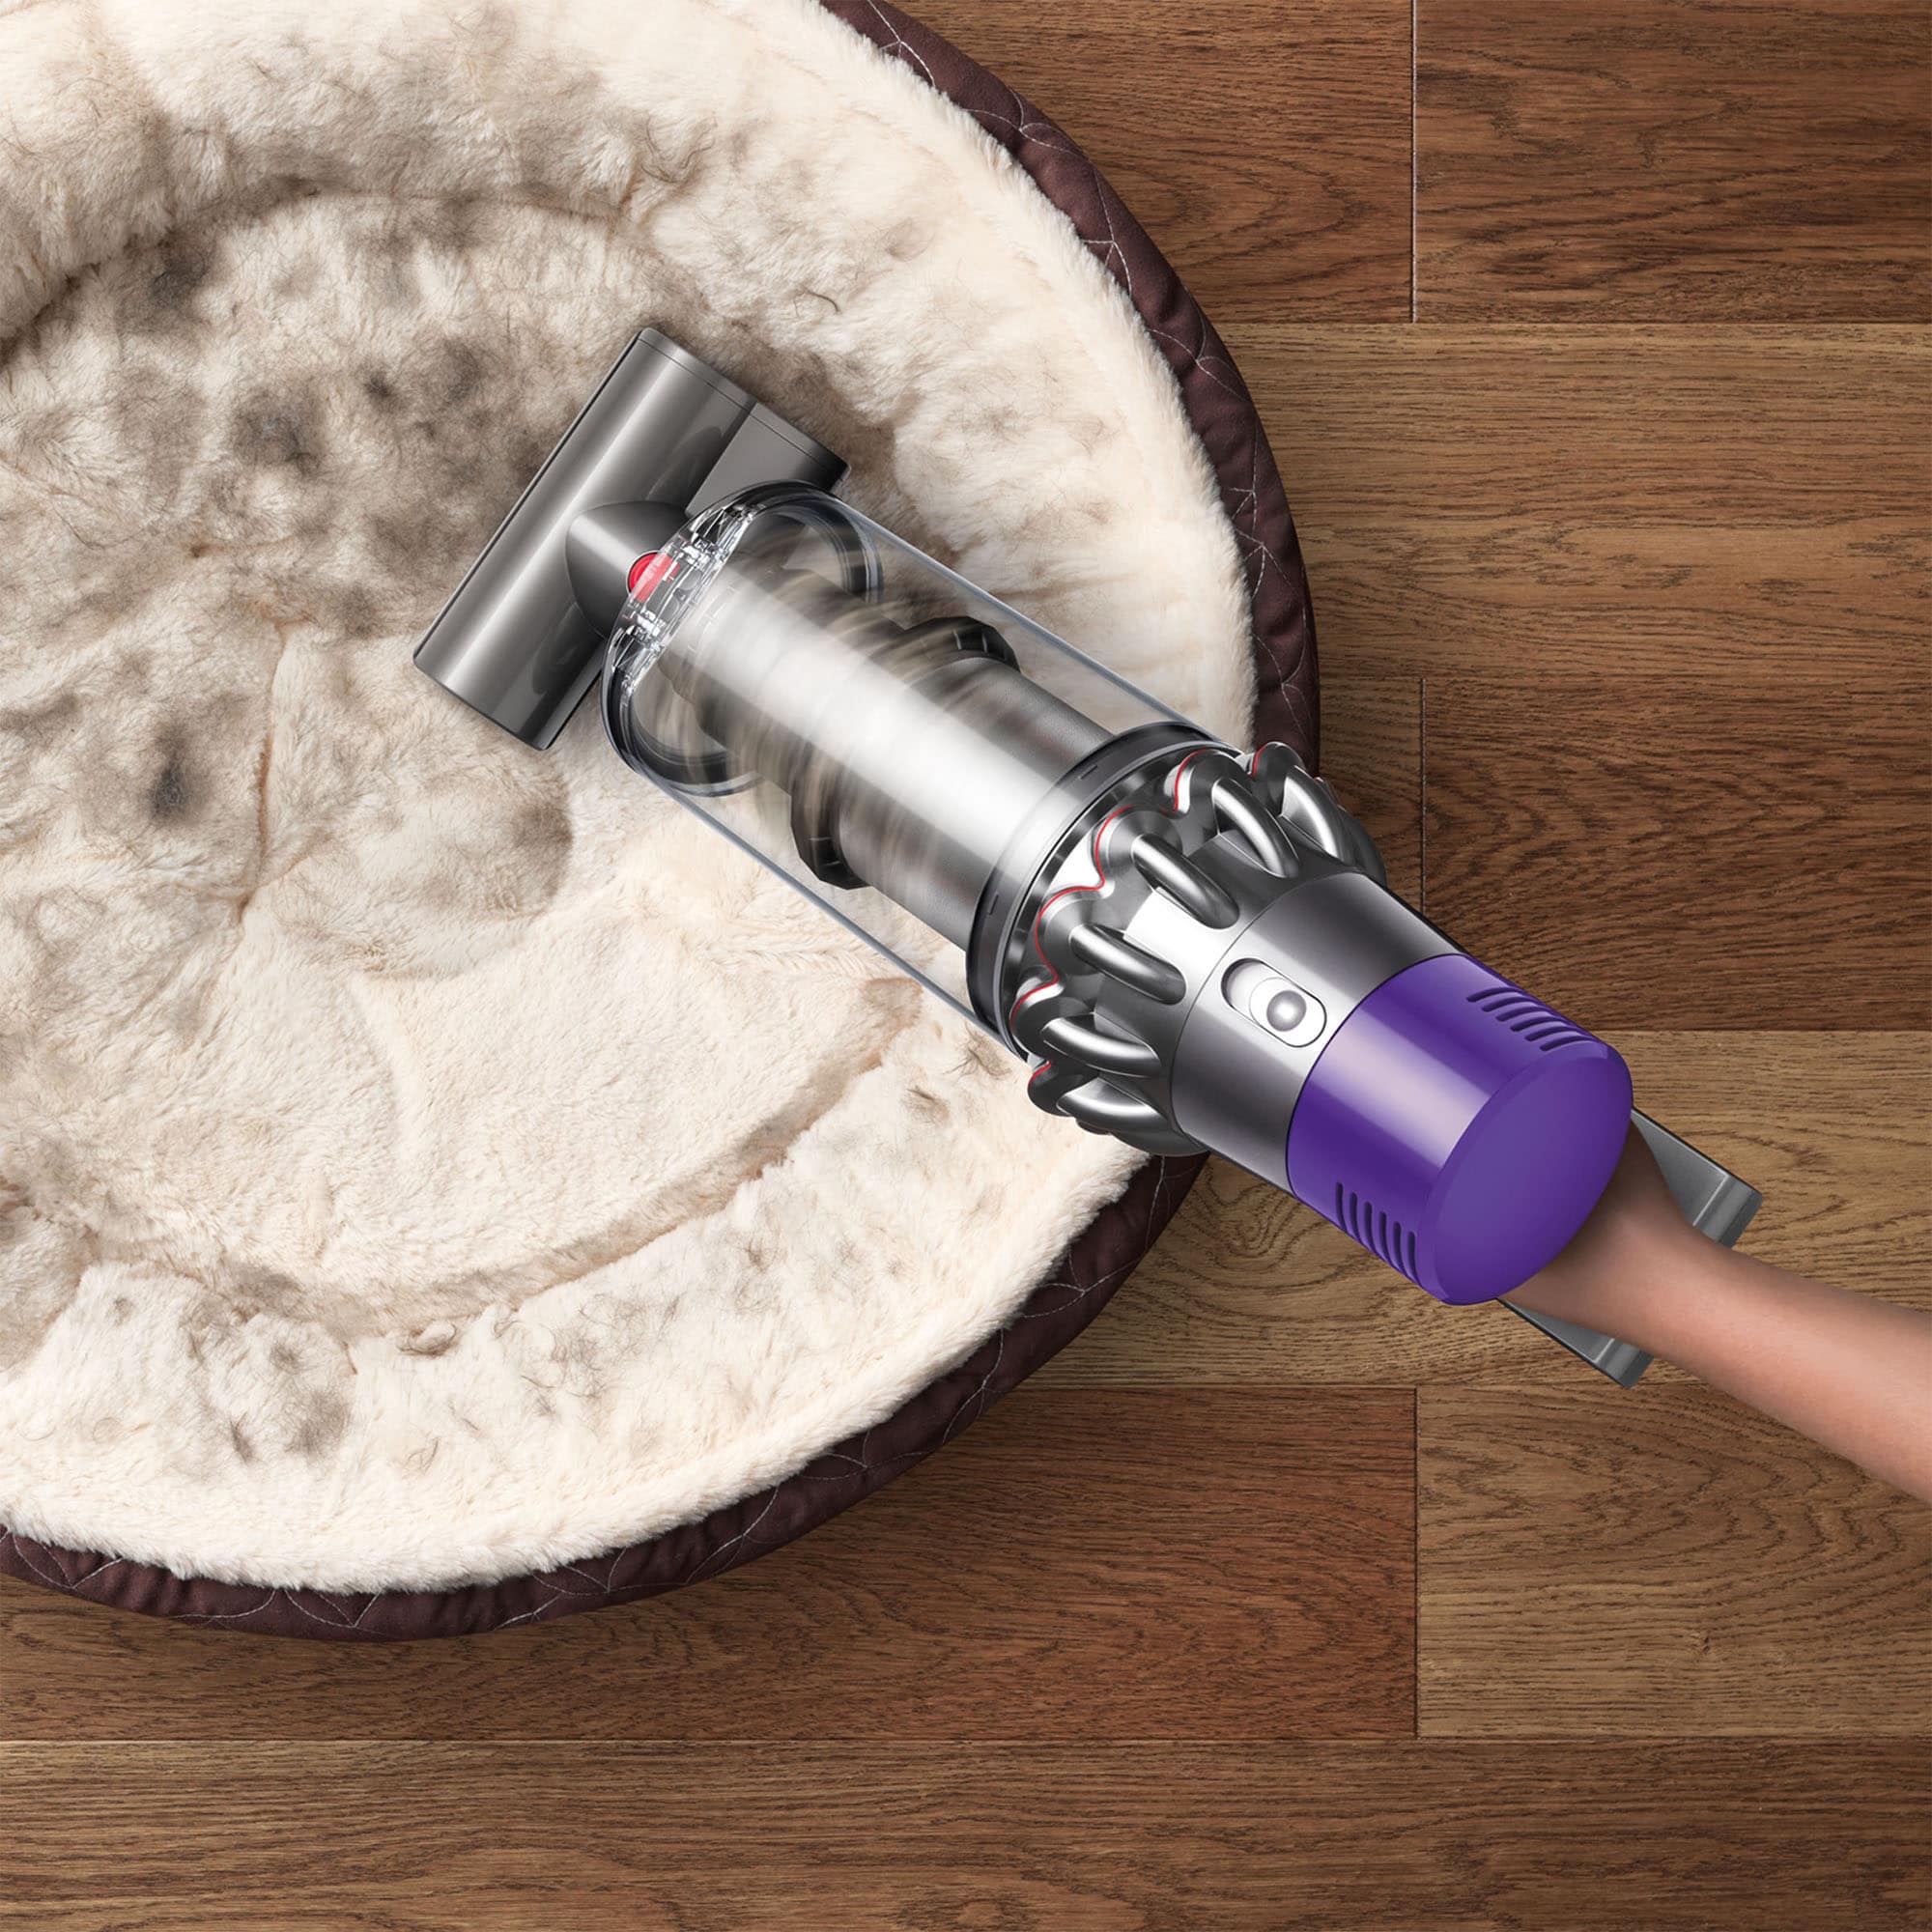 Dyson Cyclone V10 Animal Cordless Stick Vacuum Cleaner, Whole Machine  Filtration, Wall Mounted, Up to 60 Min Runtime, Rechargeable Battery,  2-Year